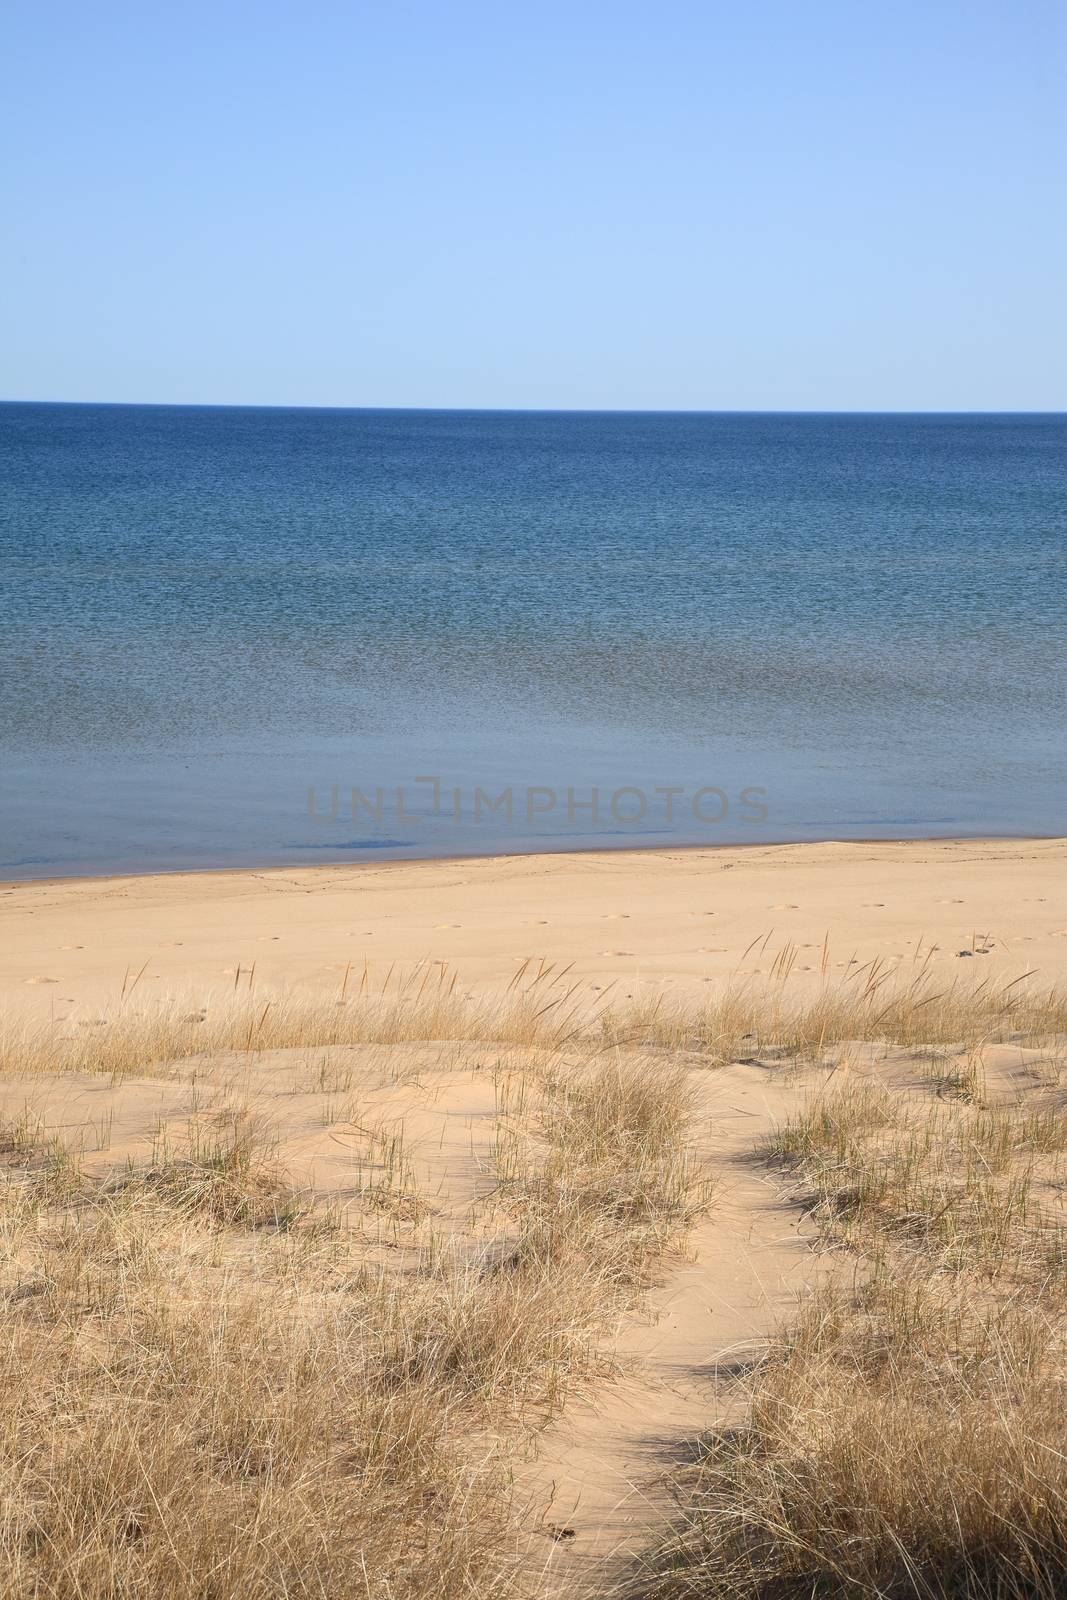 Grassy and sandy shoreline and beach of a North American Great Lake Superior in Michigan.